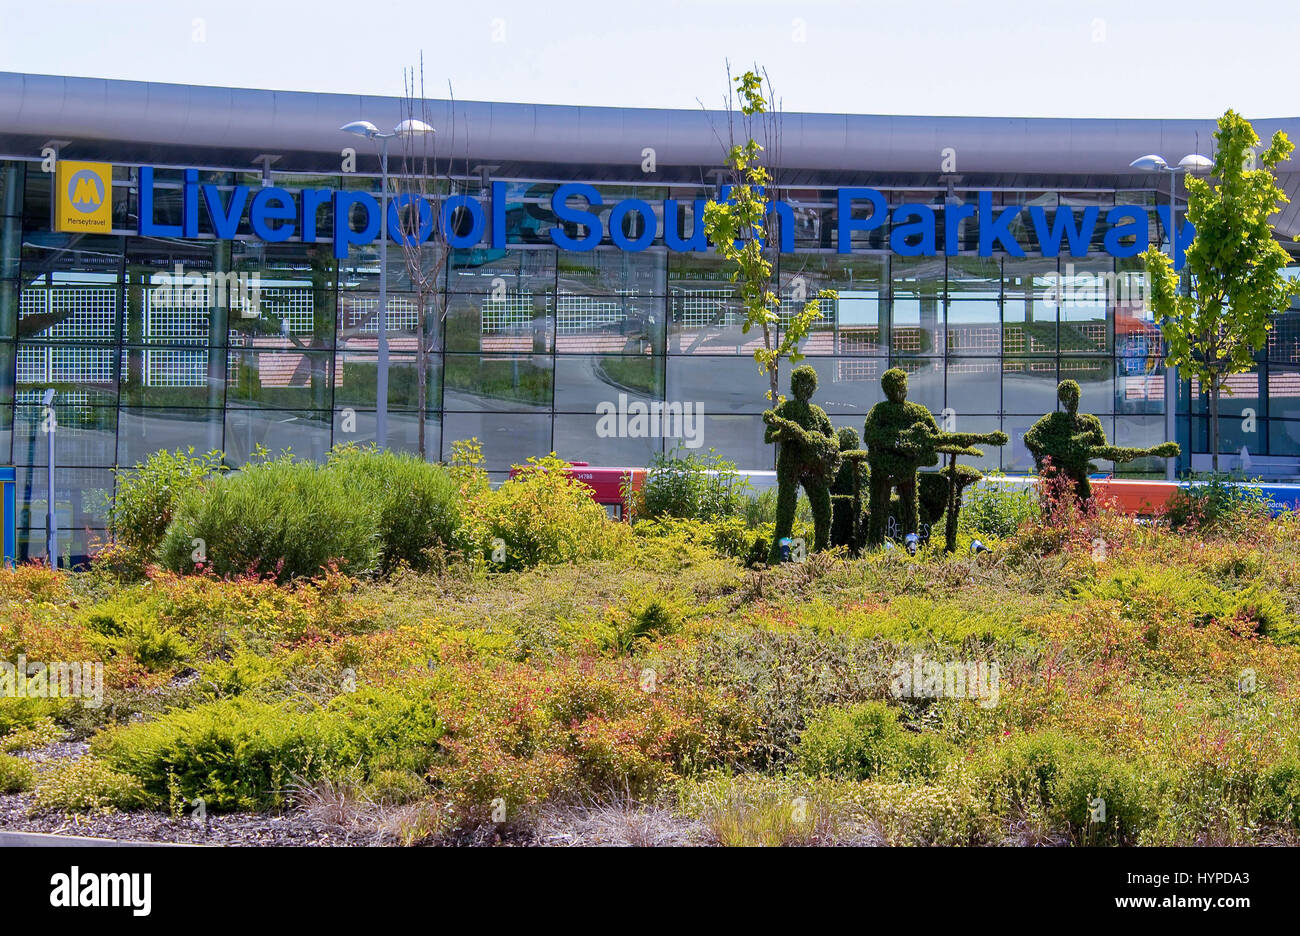 The Floral Beatles topiary at Liver[ool South Parkway interchange station. Stock Photo